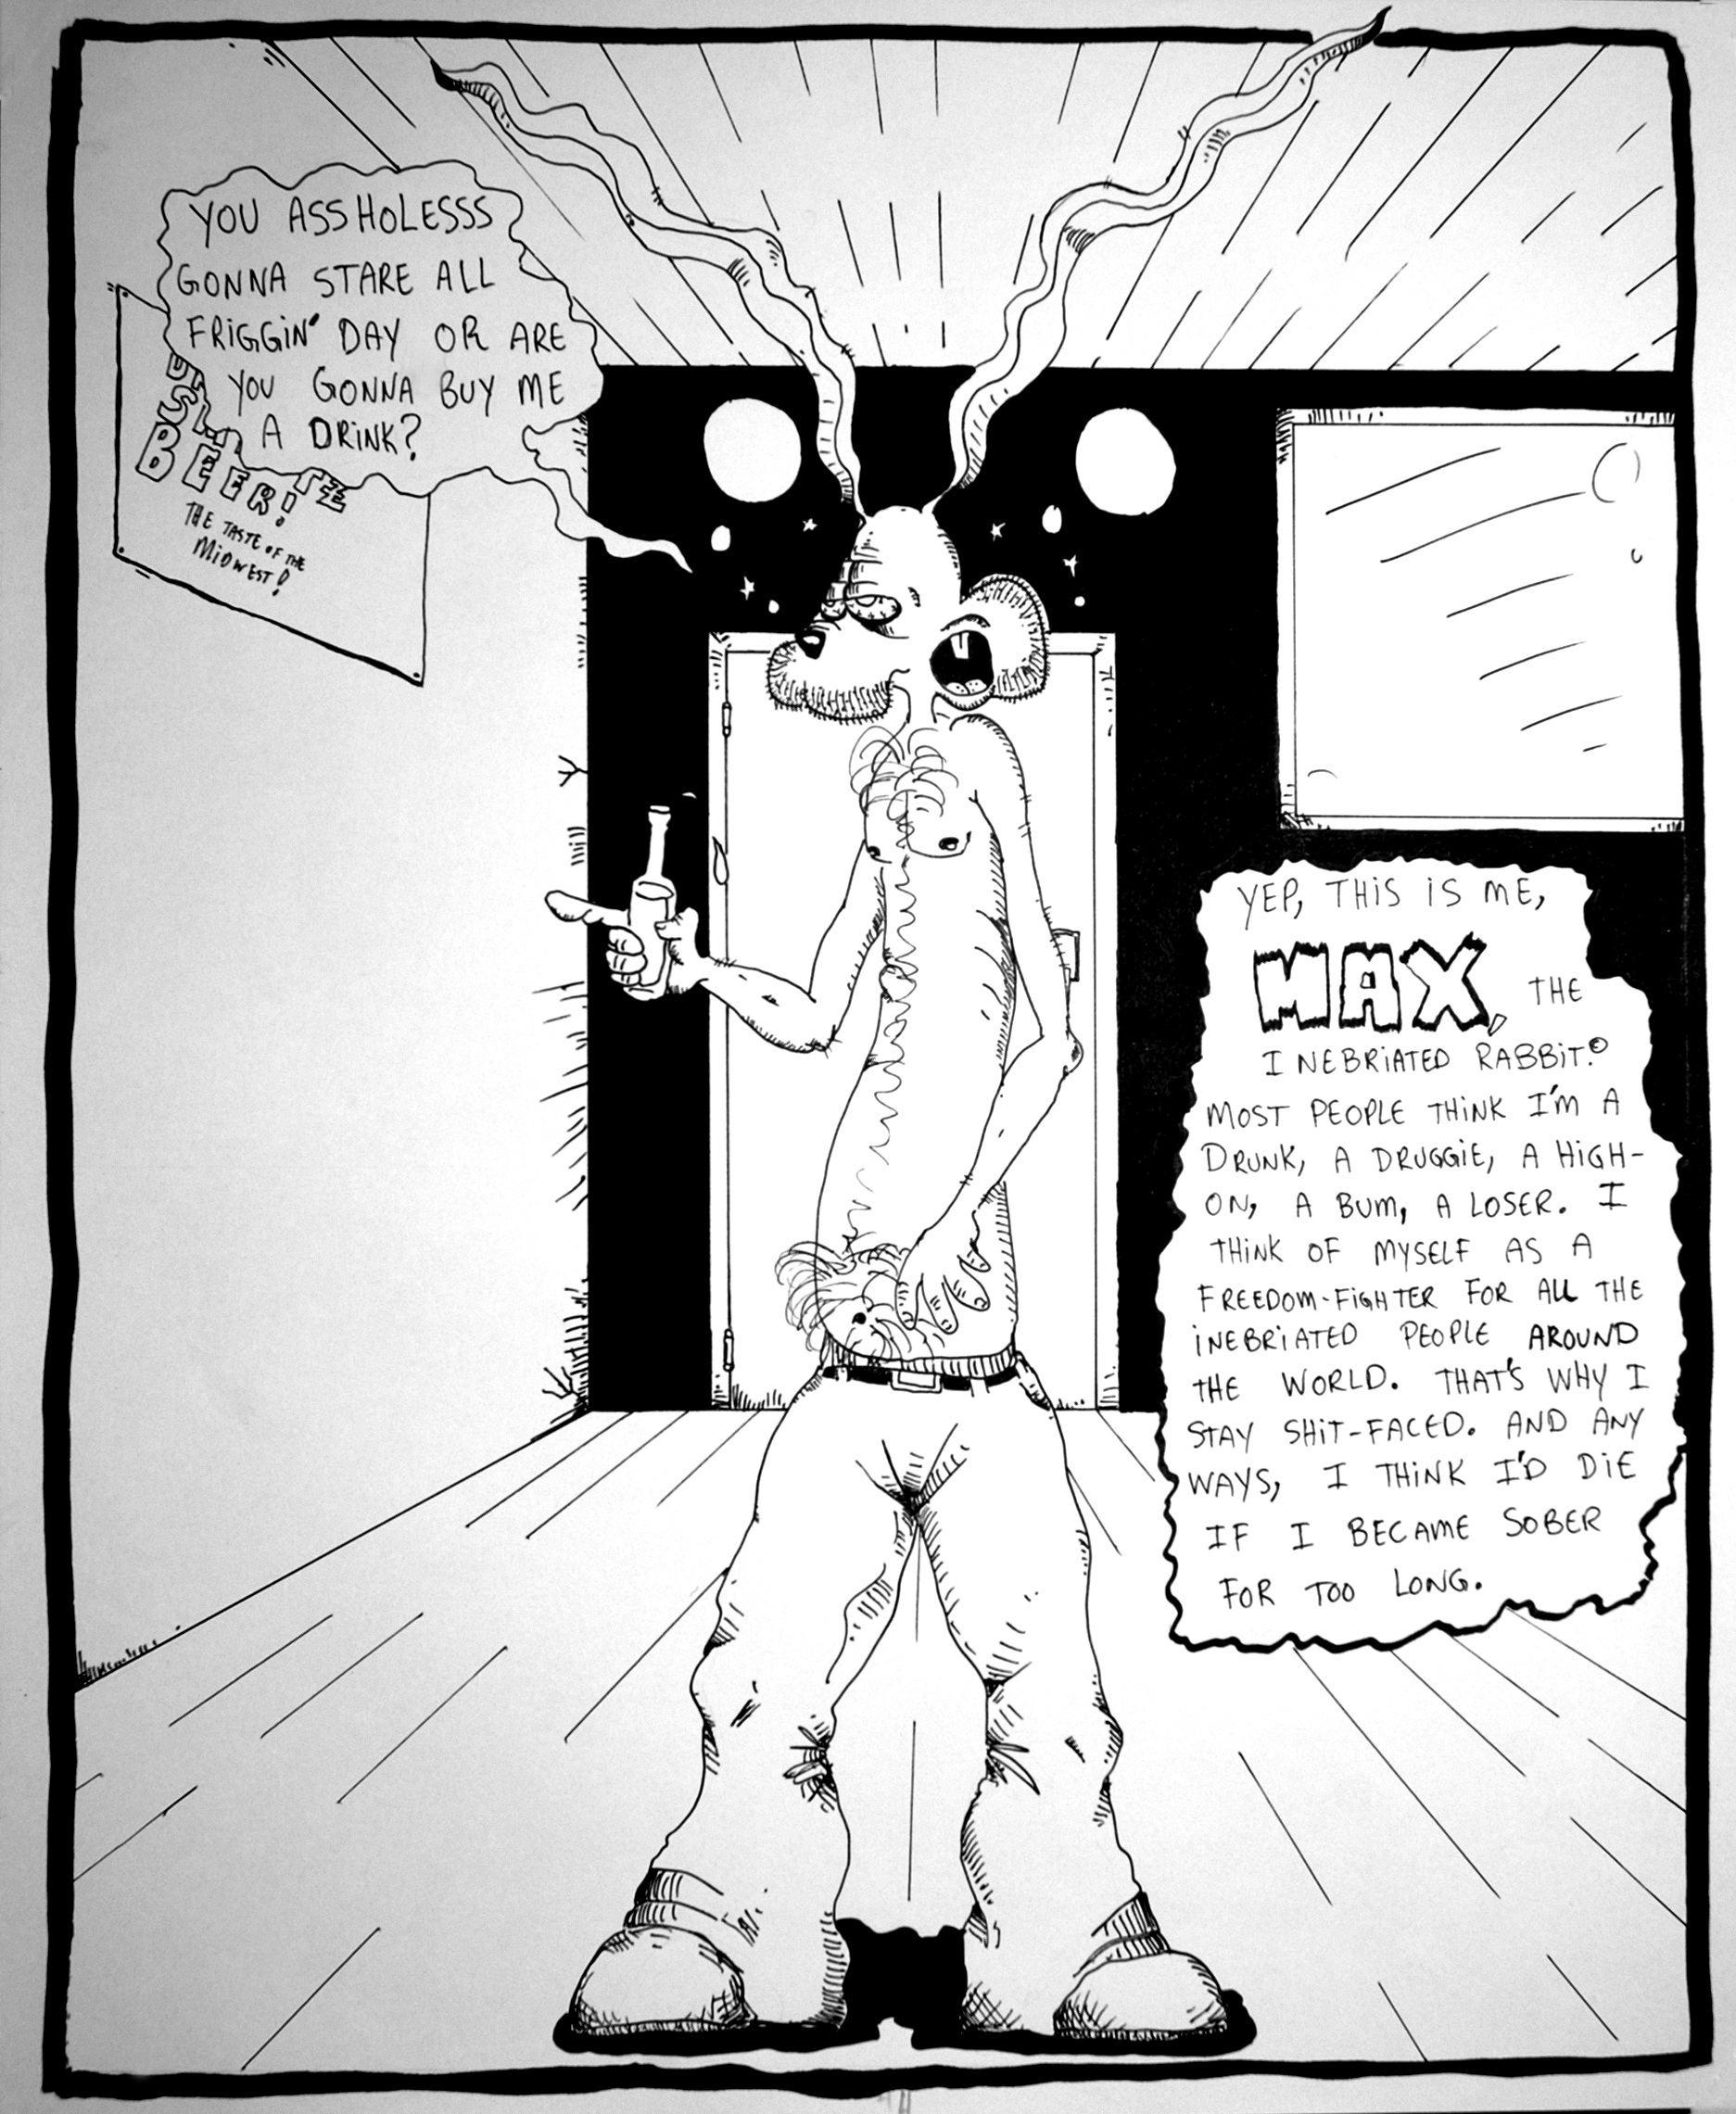 Page four, issue one.